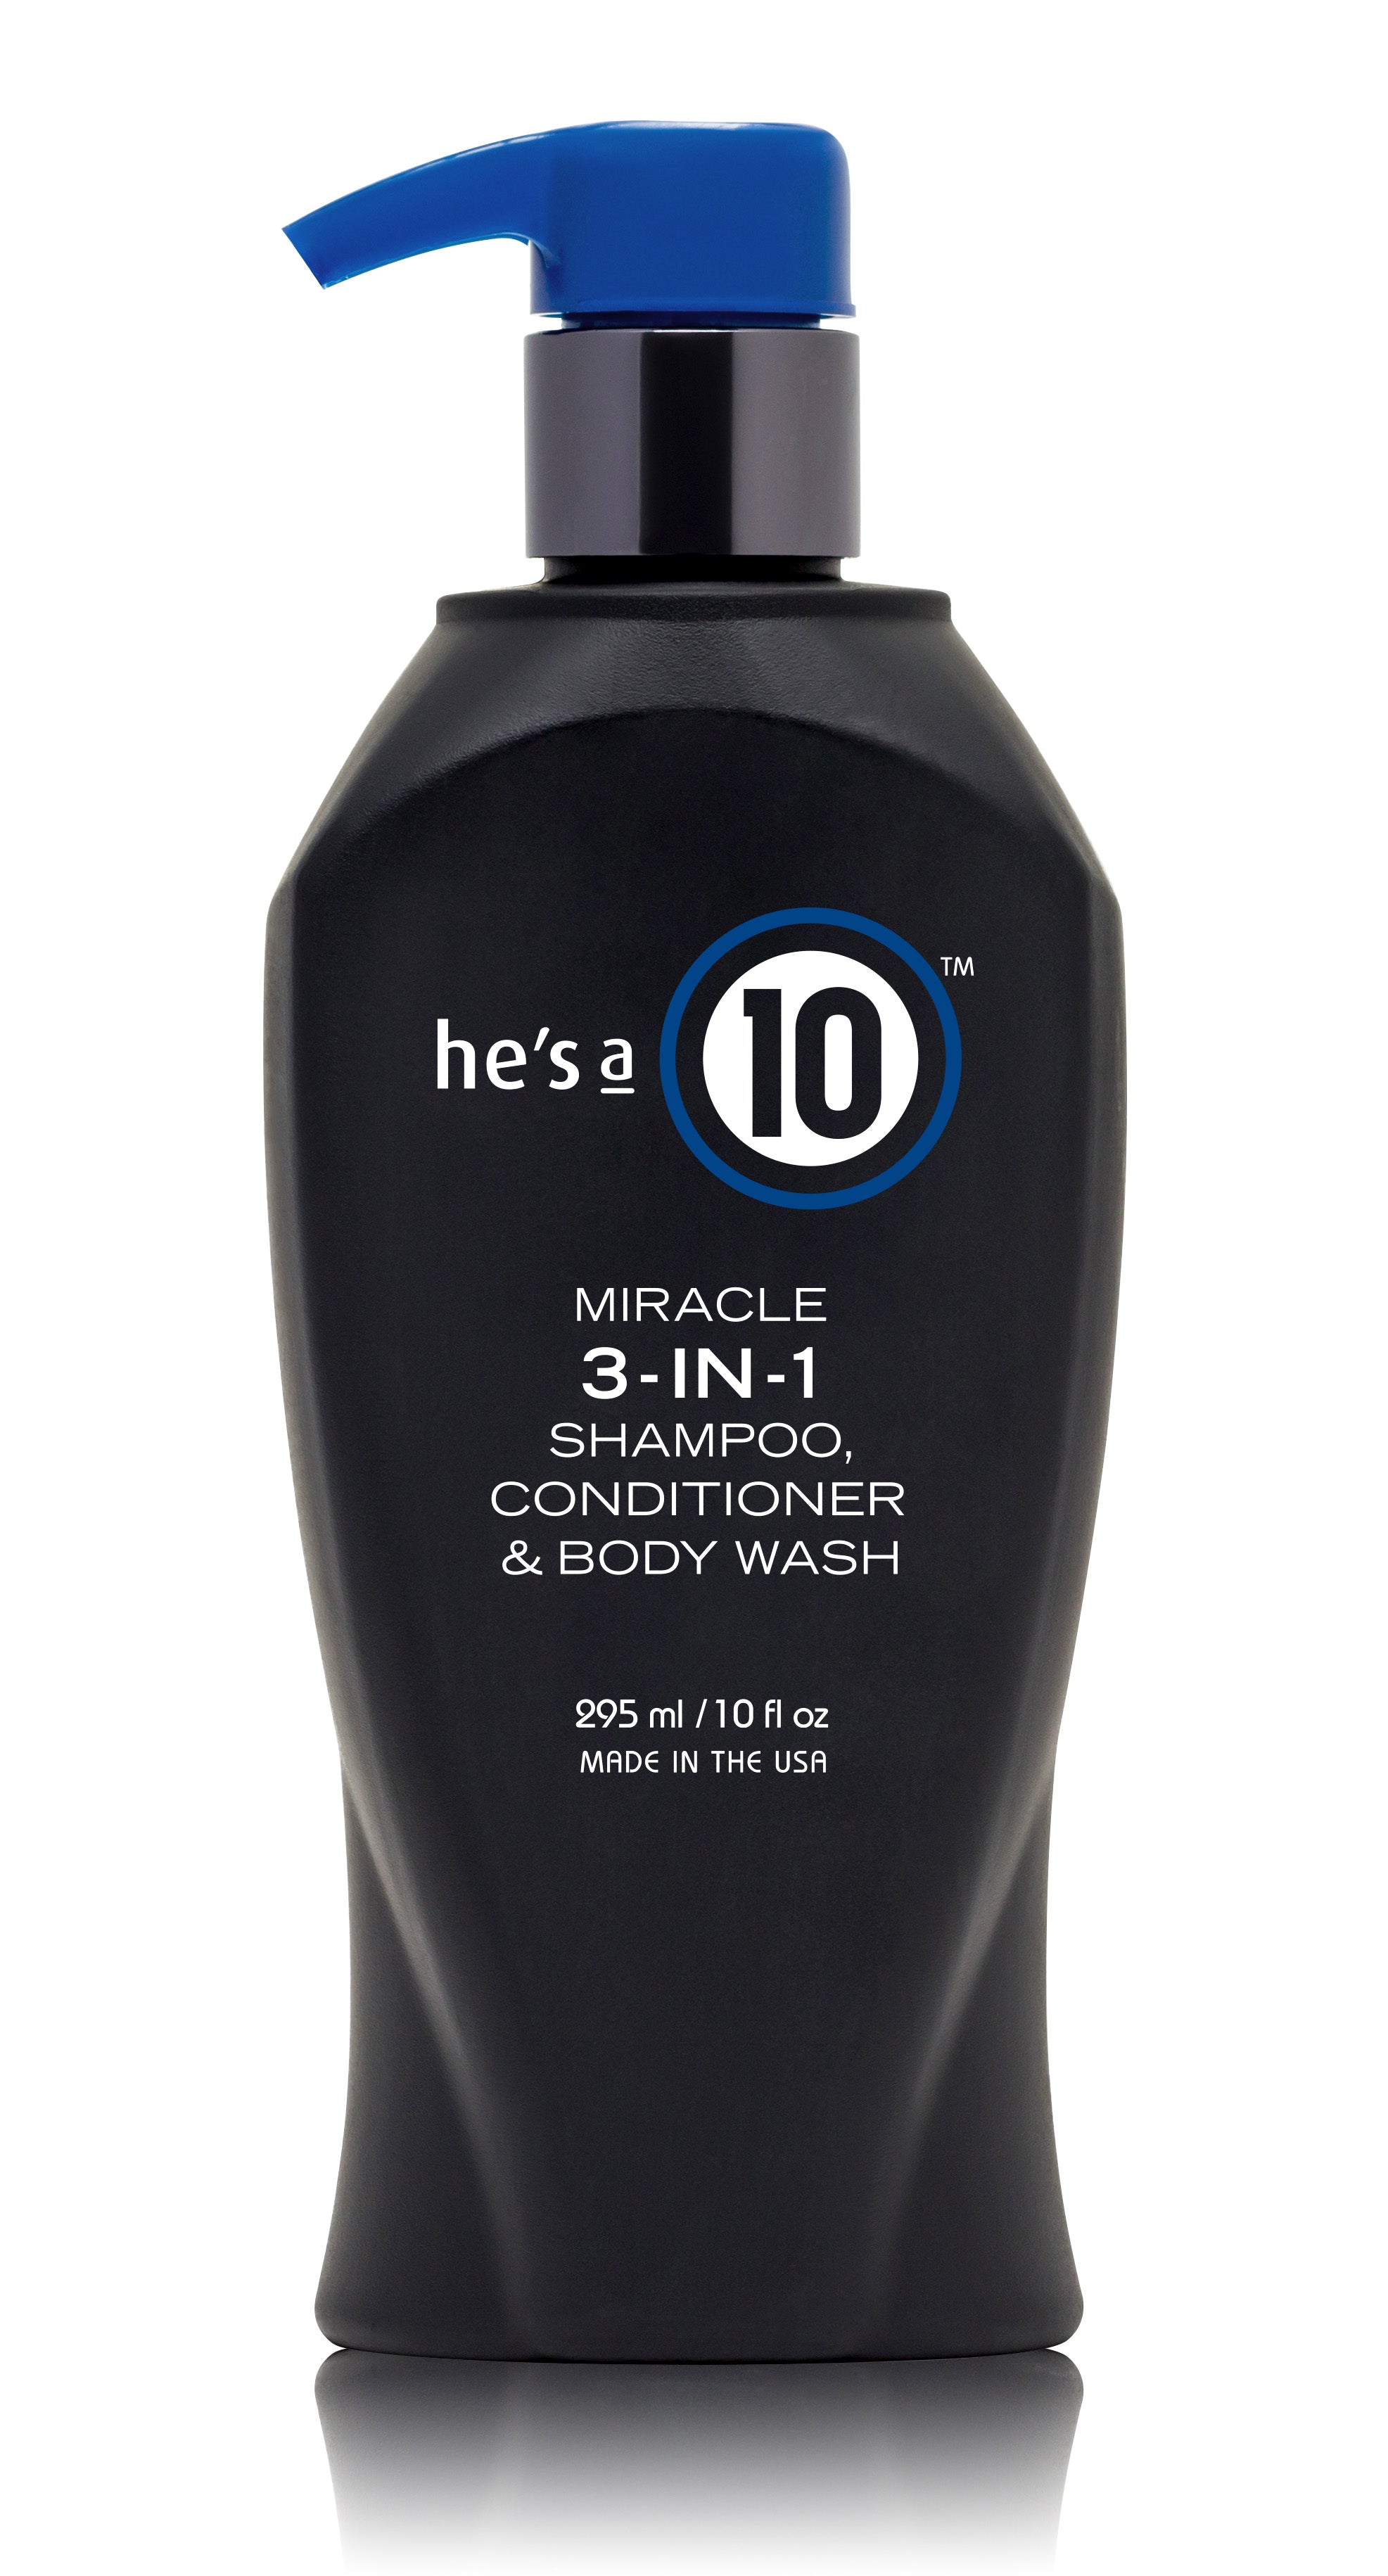 10 Men's Miracle Shampoo, Conditioner & Body Wash